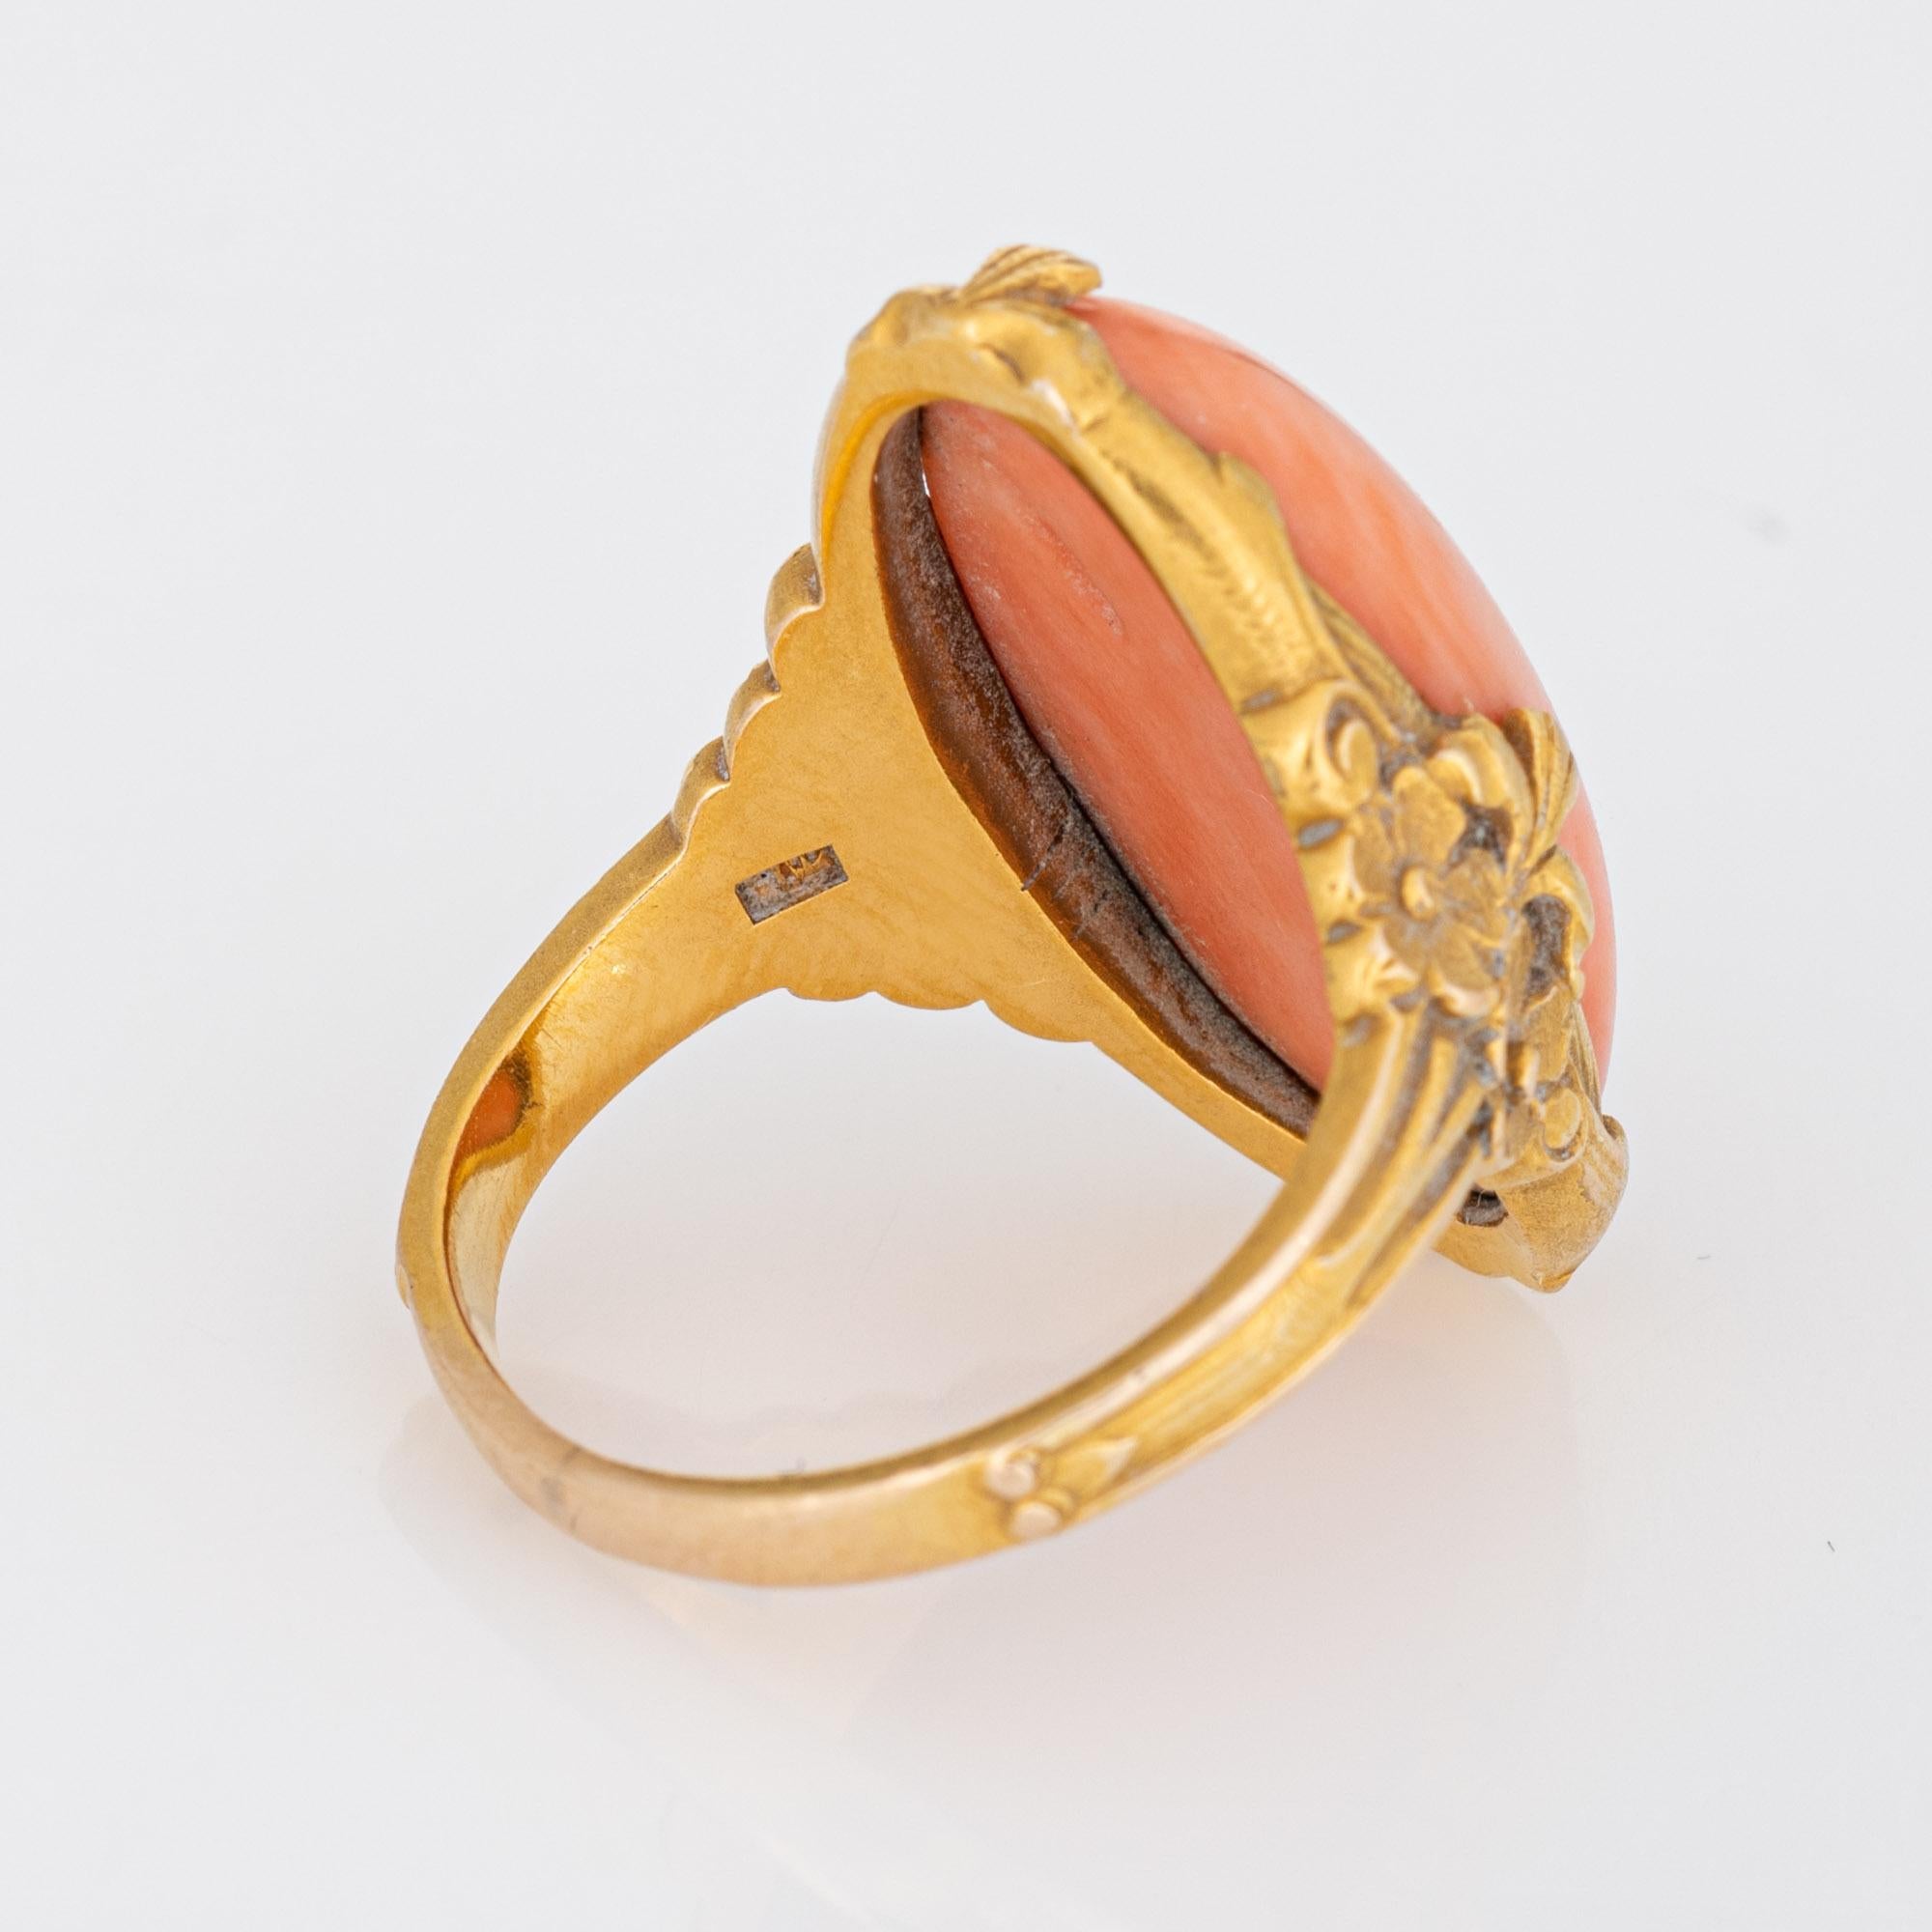 Antique Art Nouveau Coral Ring Vintage 14k Yellow Gold Oval Flowers Fine Jewelry 1